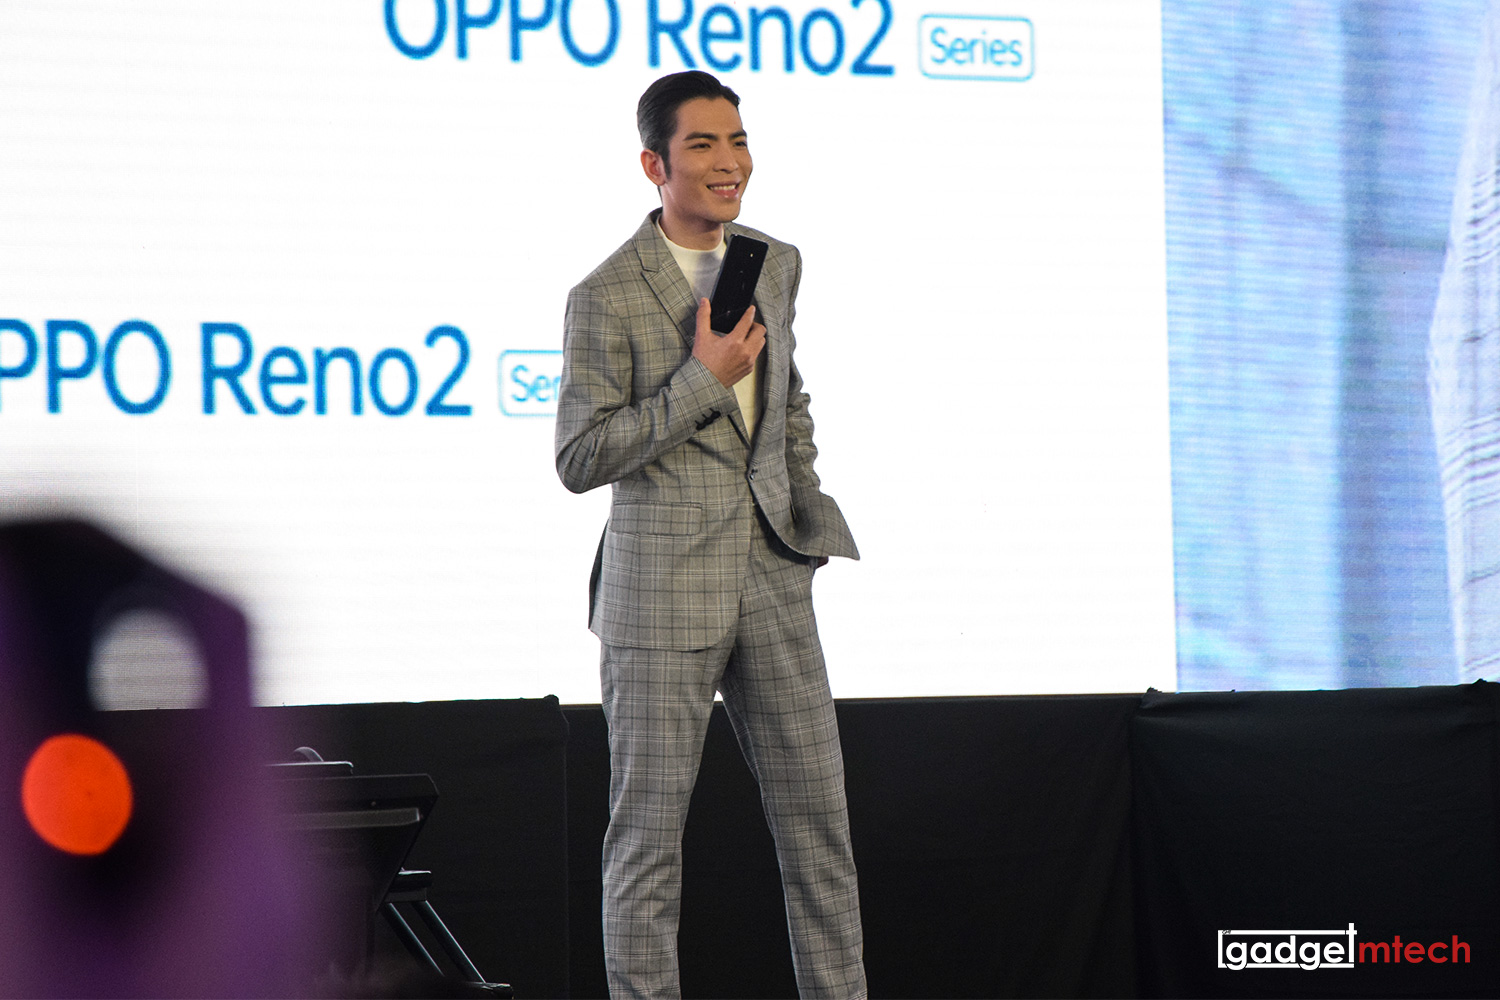 OPPO Reno2 Series Officially Launched in Malaysia